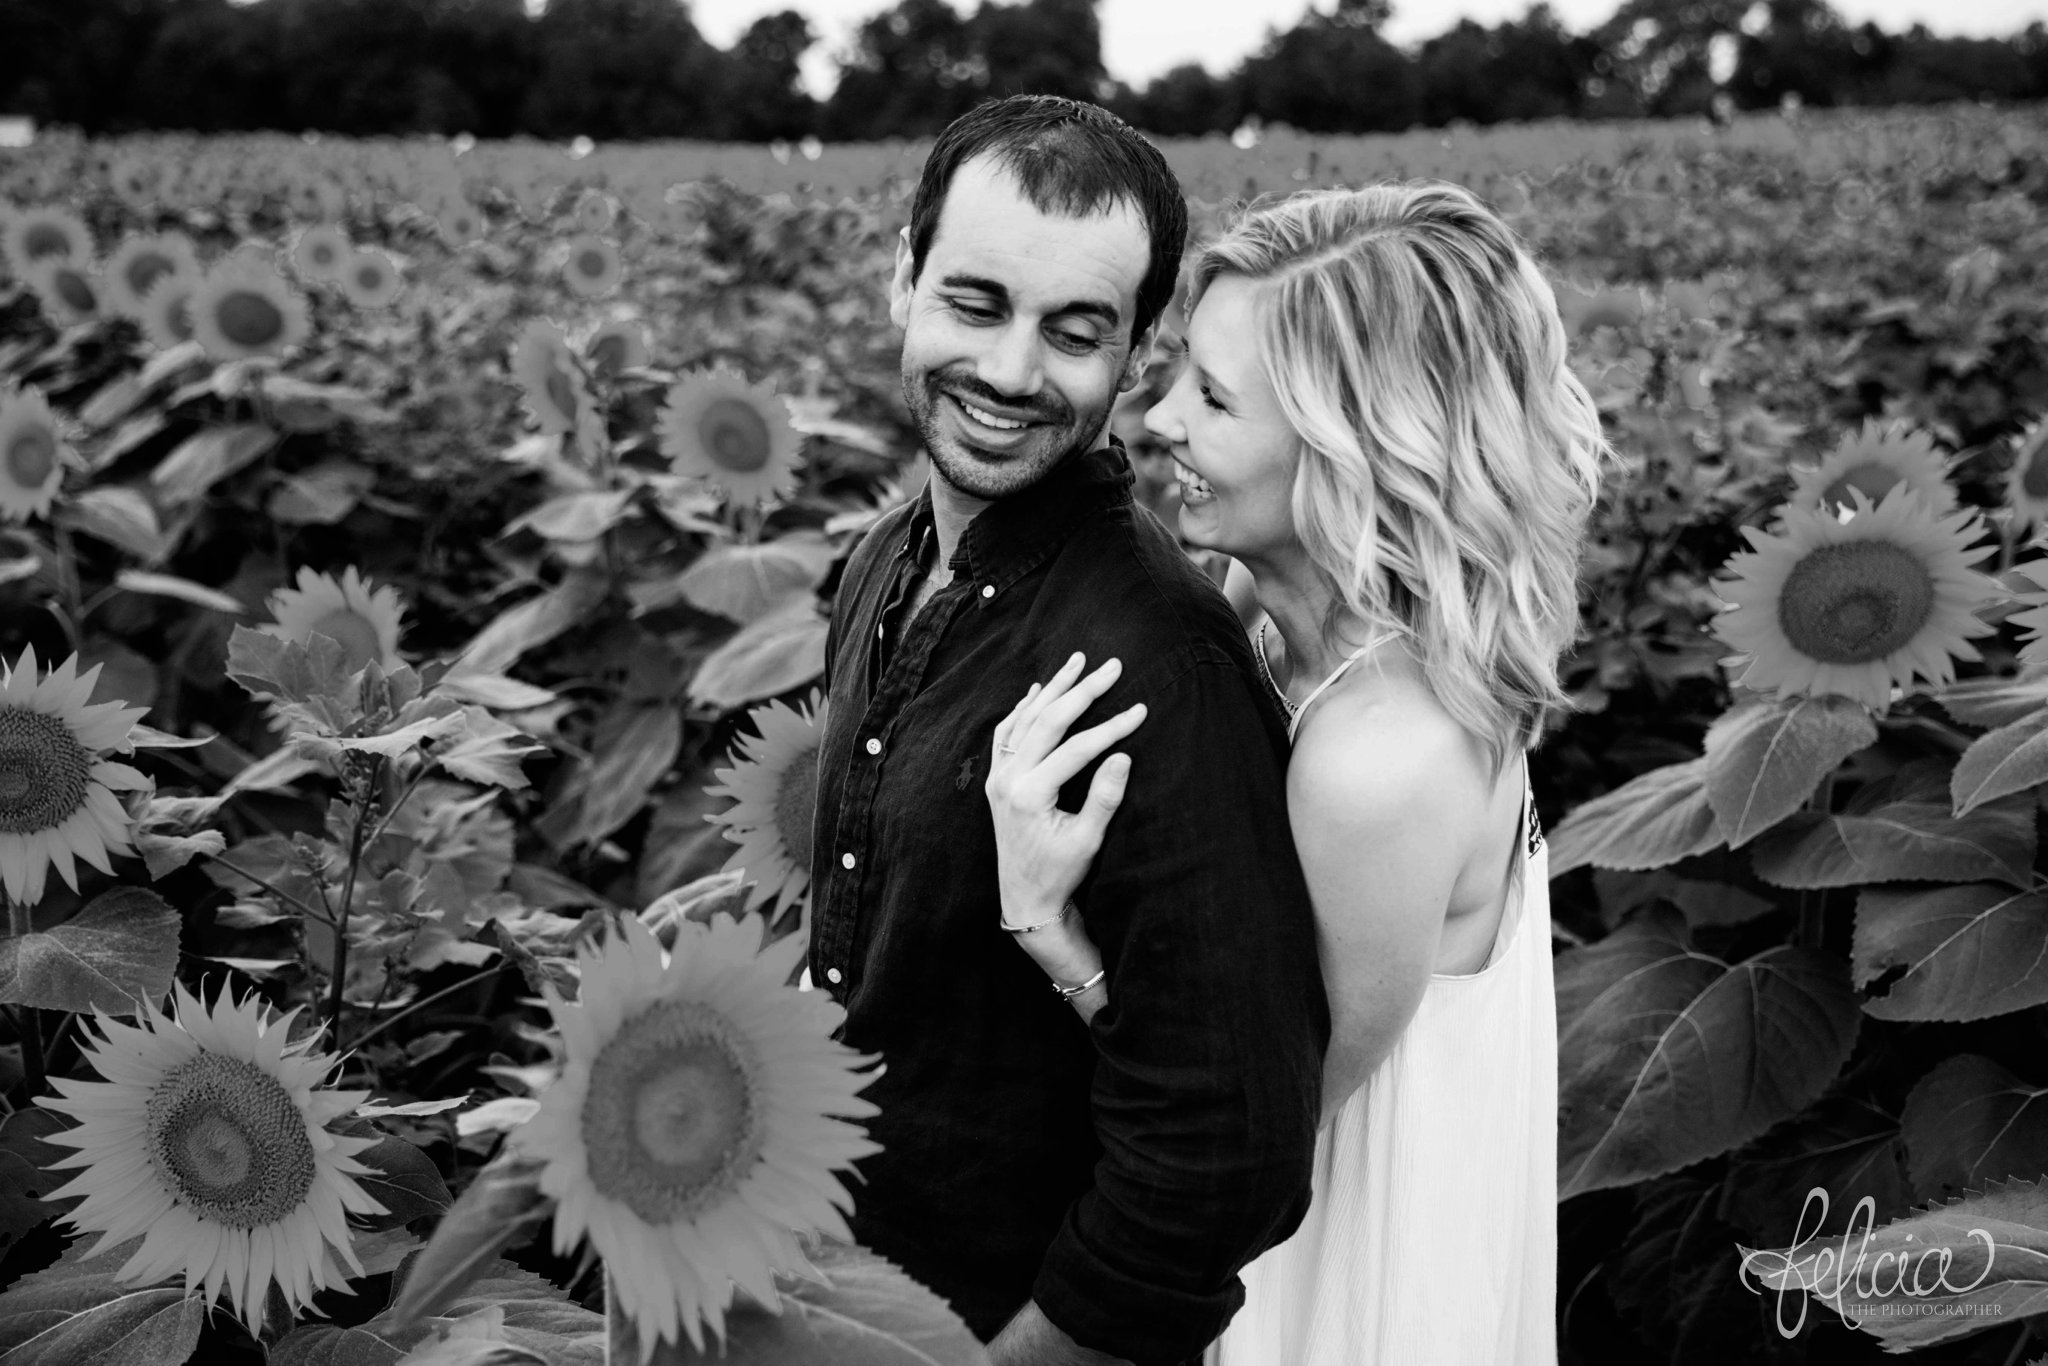 Sunrise Engagement Photos | Felicia The Photographer | Sunflower field | hug from behind | Black and White